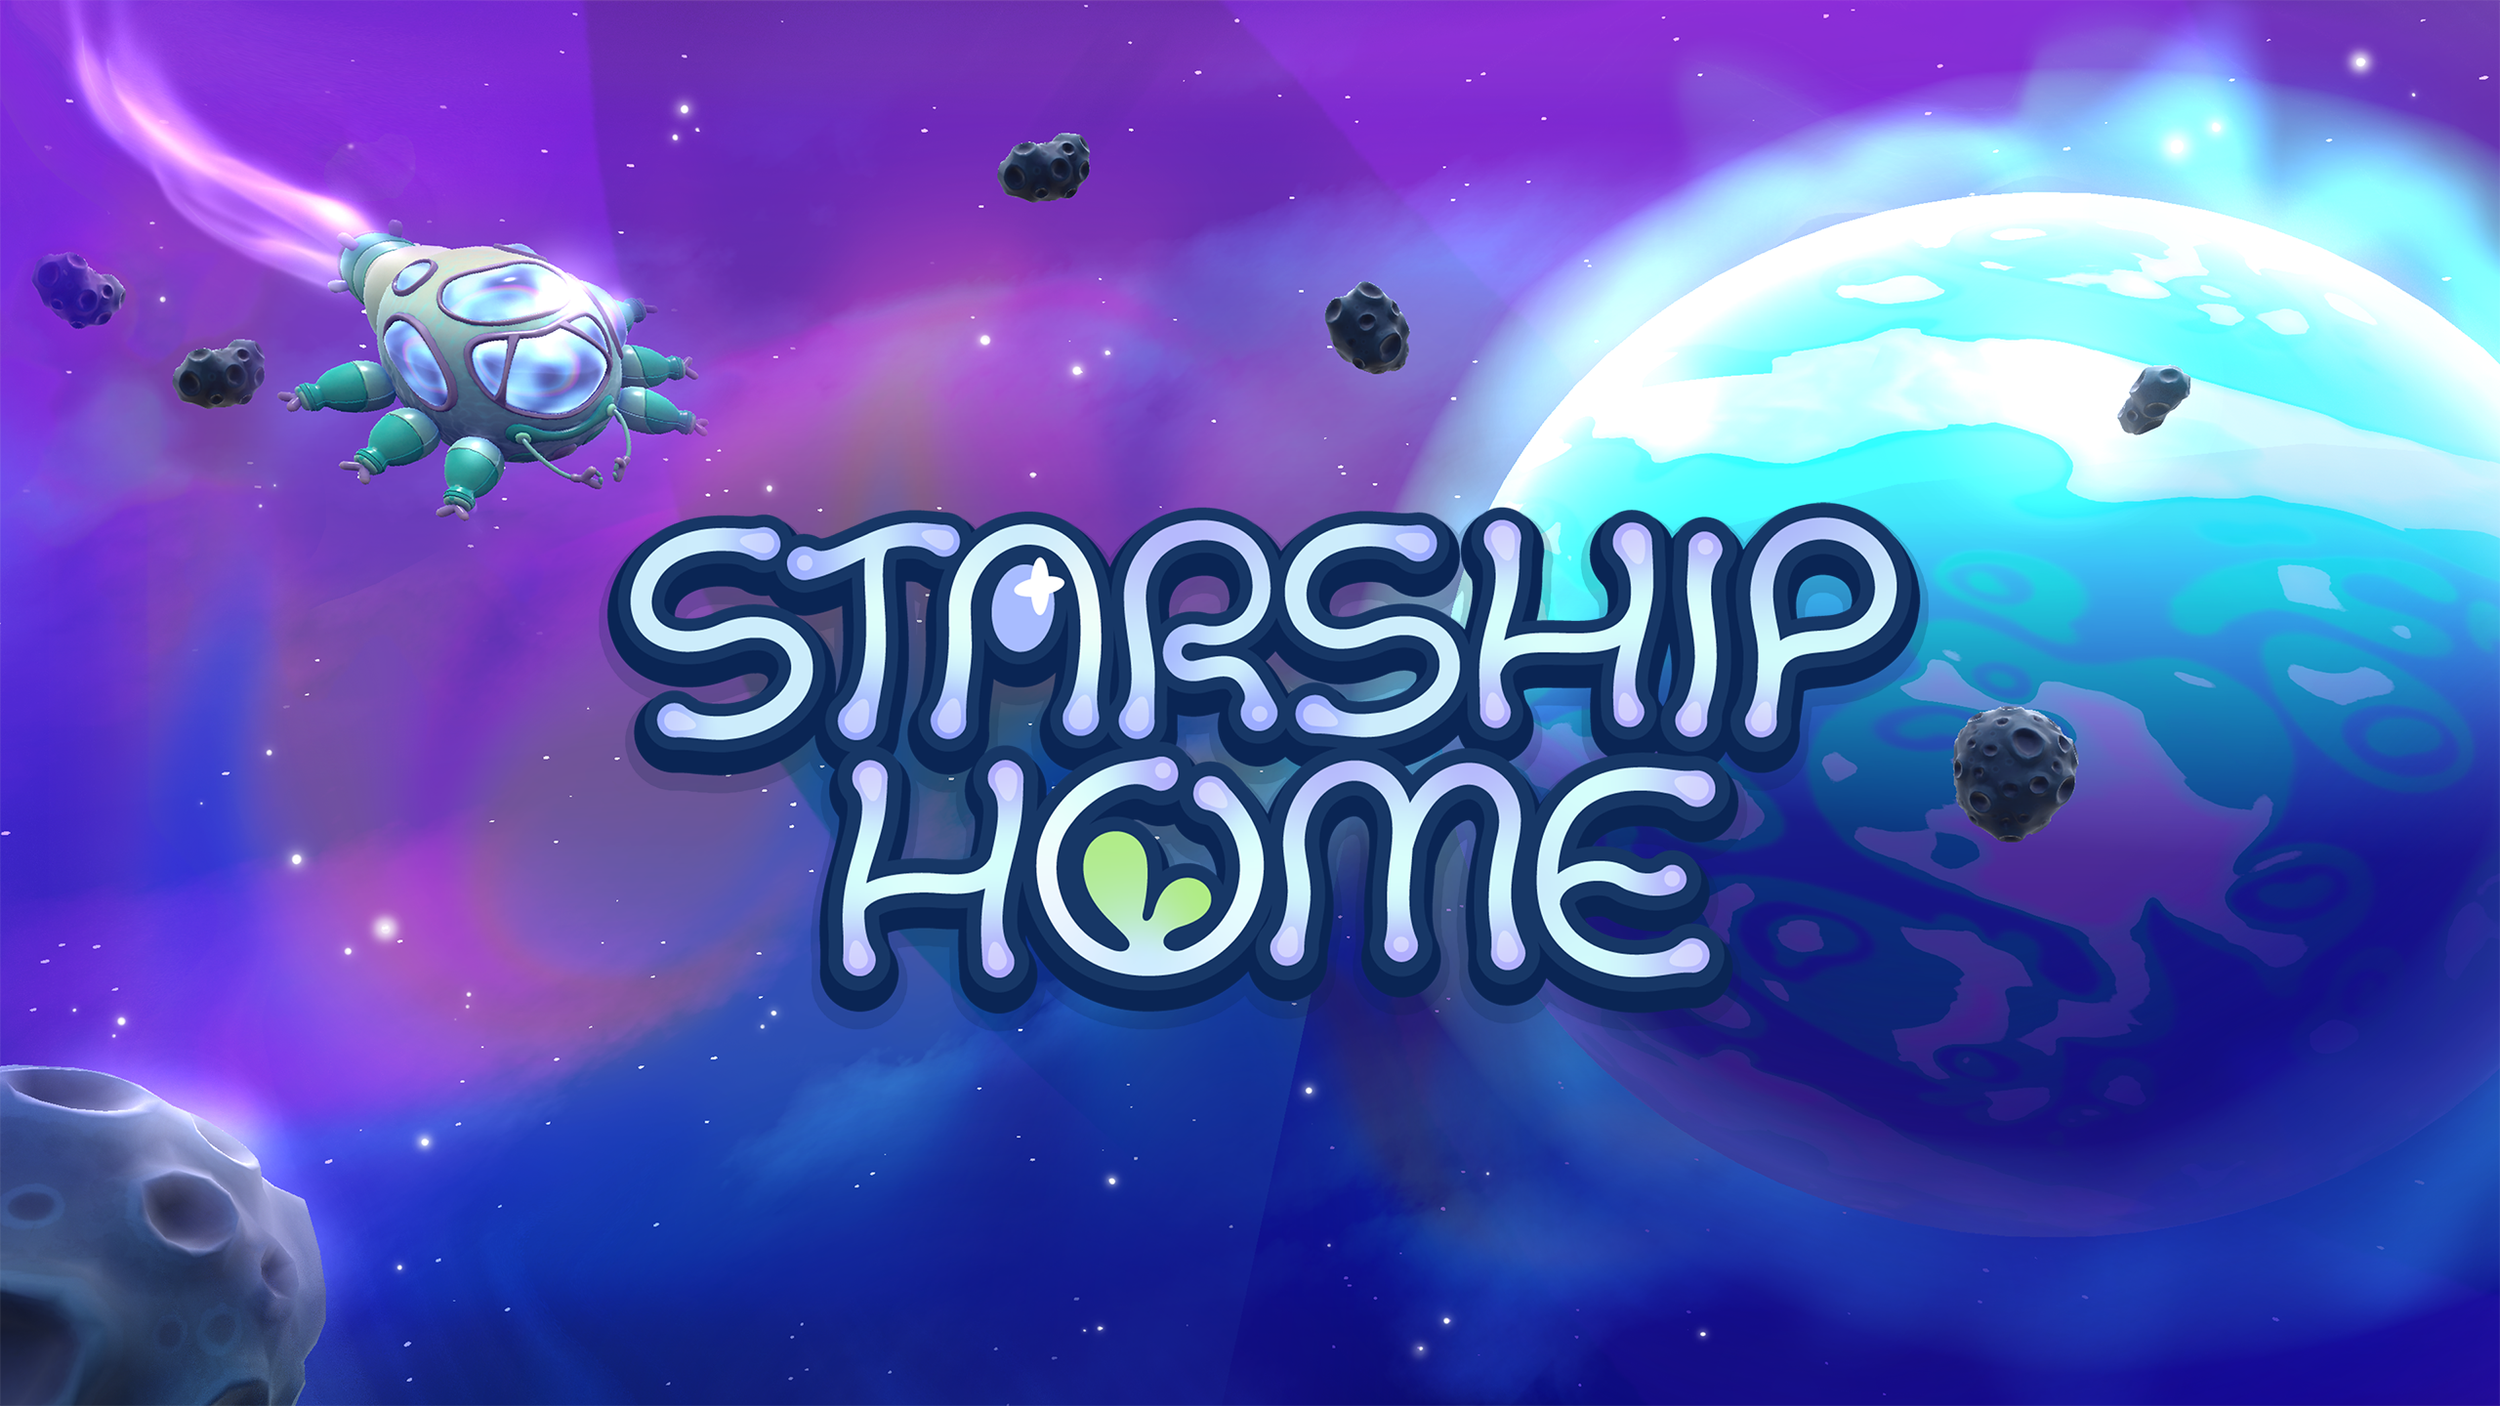 Vaudeville Sound Group and Creature Team Up to Bring Cosmic Beats in 'Starship Home'.